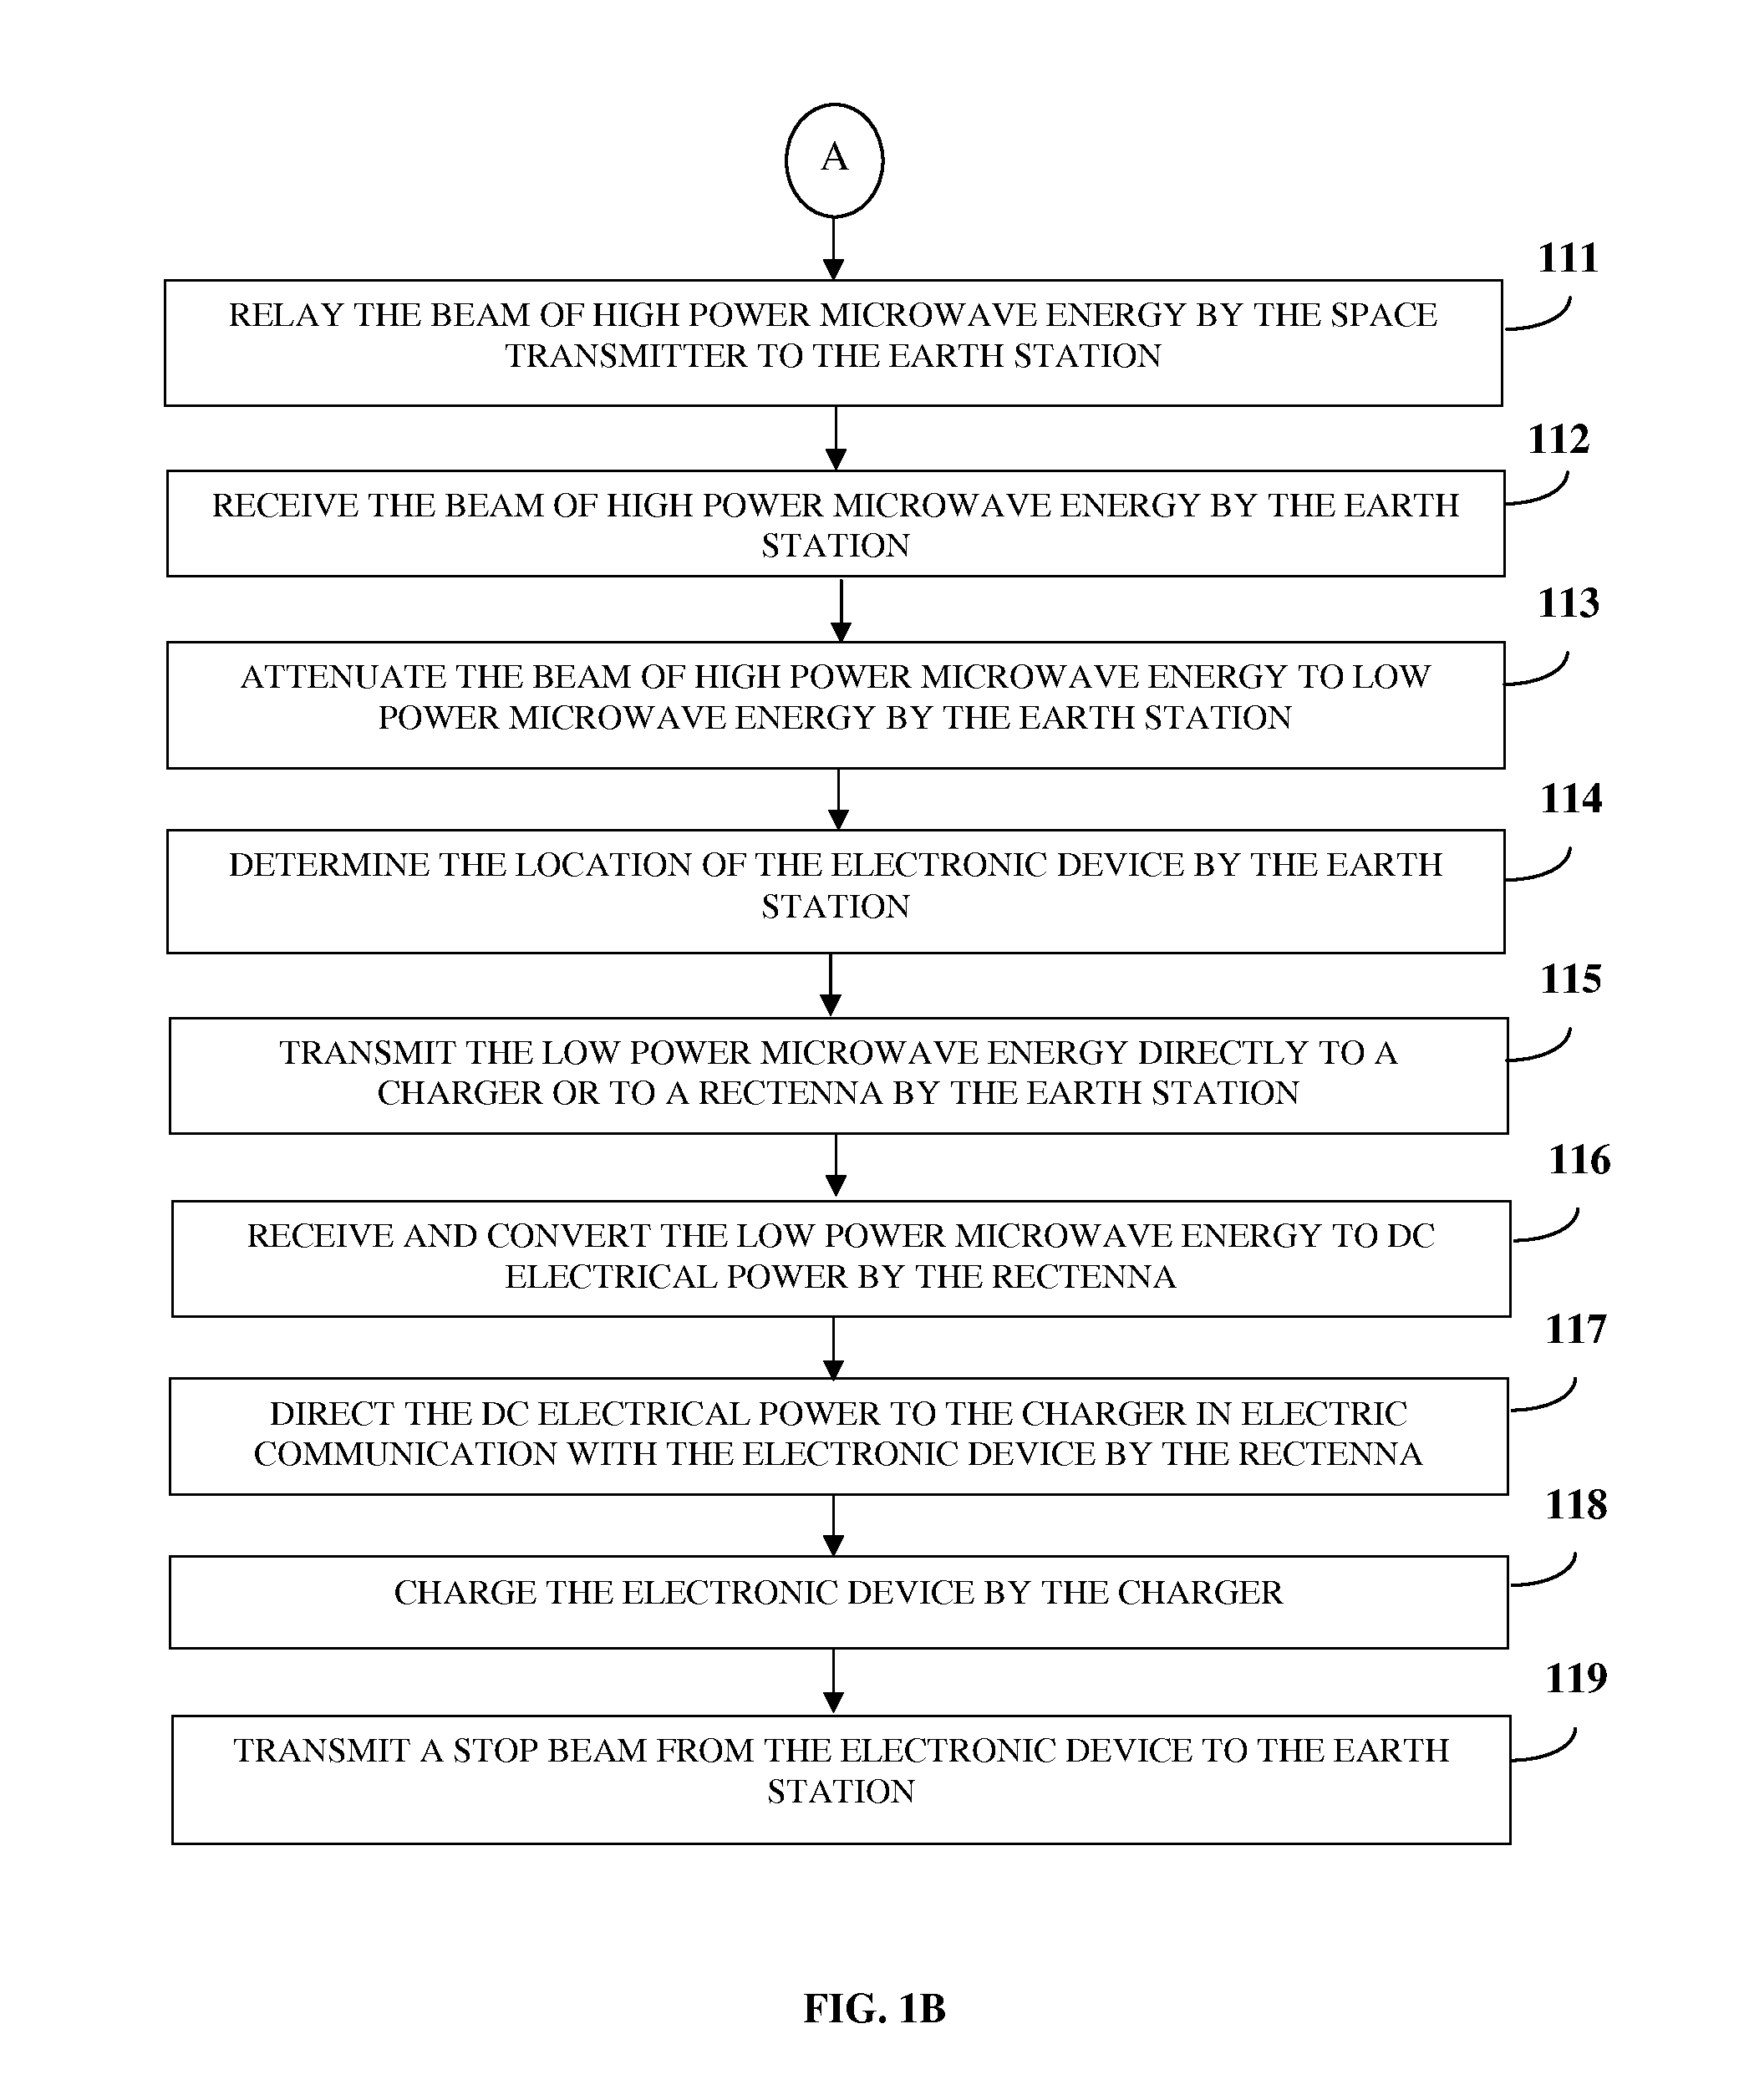 System and method for relaying energy from a space transmitter to an electronic device via an earth station